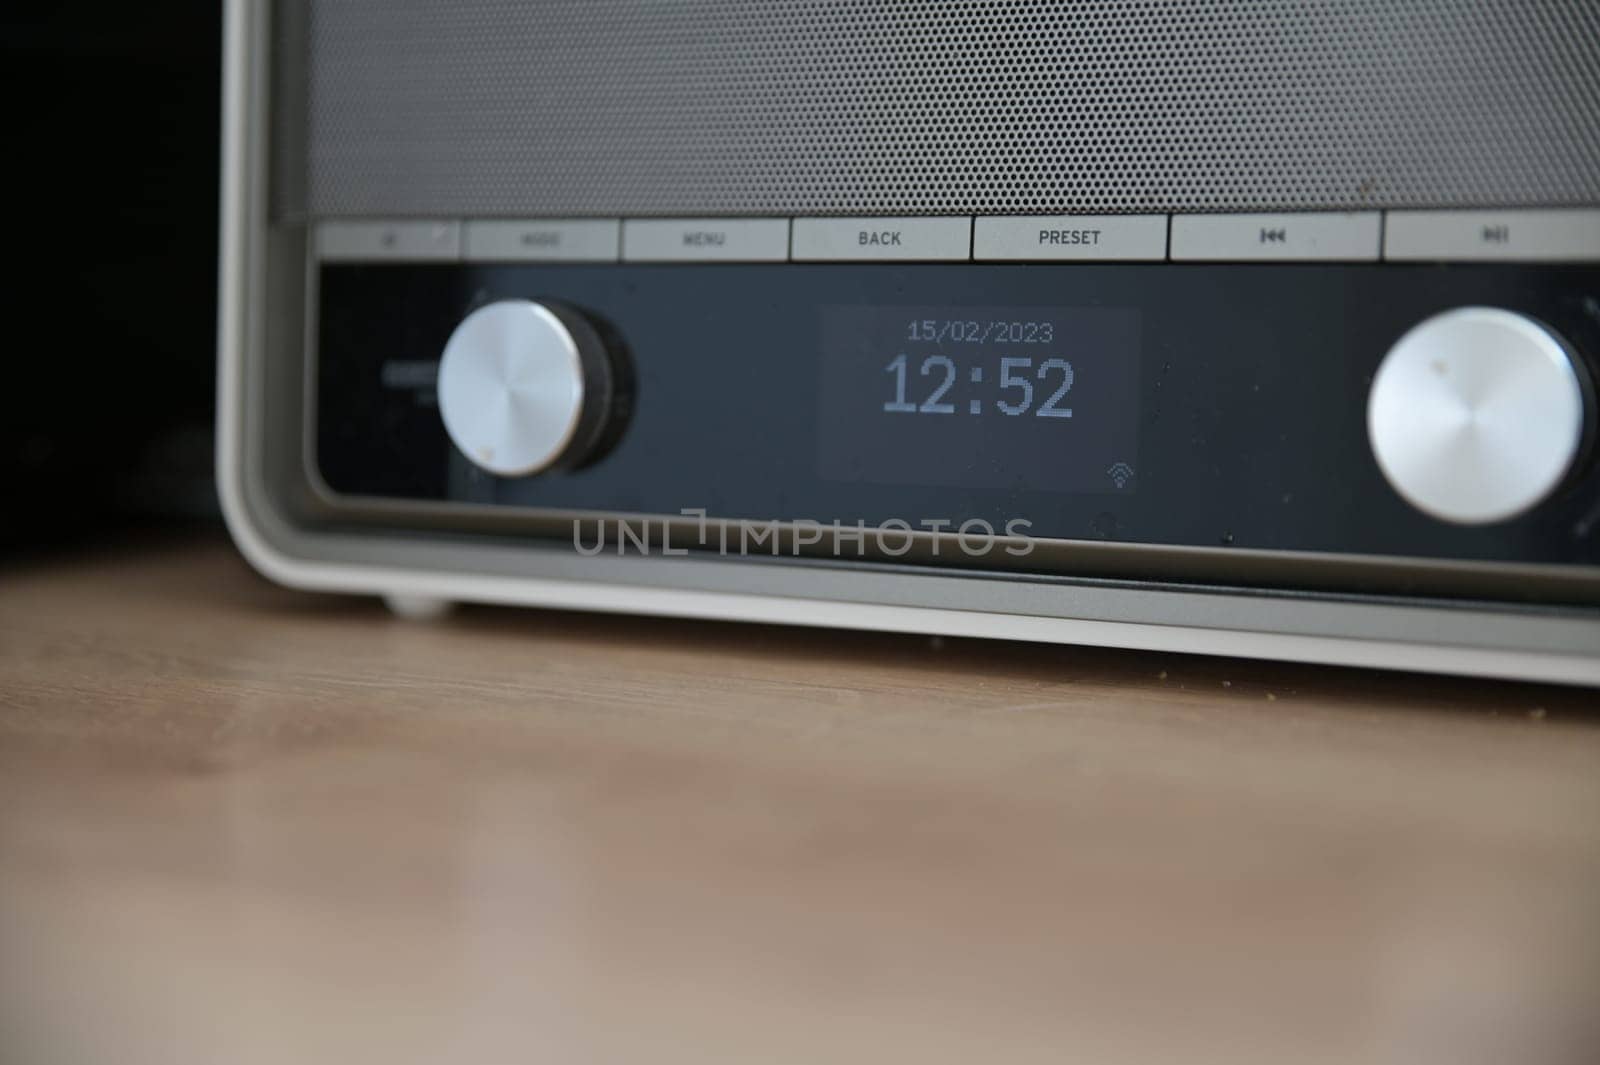 Beige retro kitchen radio with time on the LCD display by rherrmannde